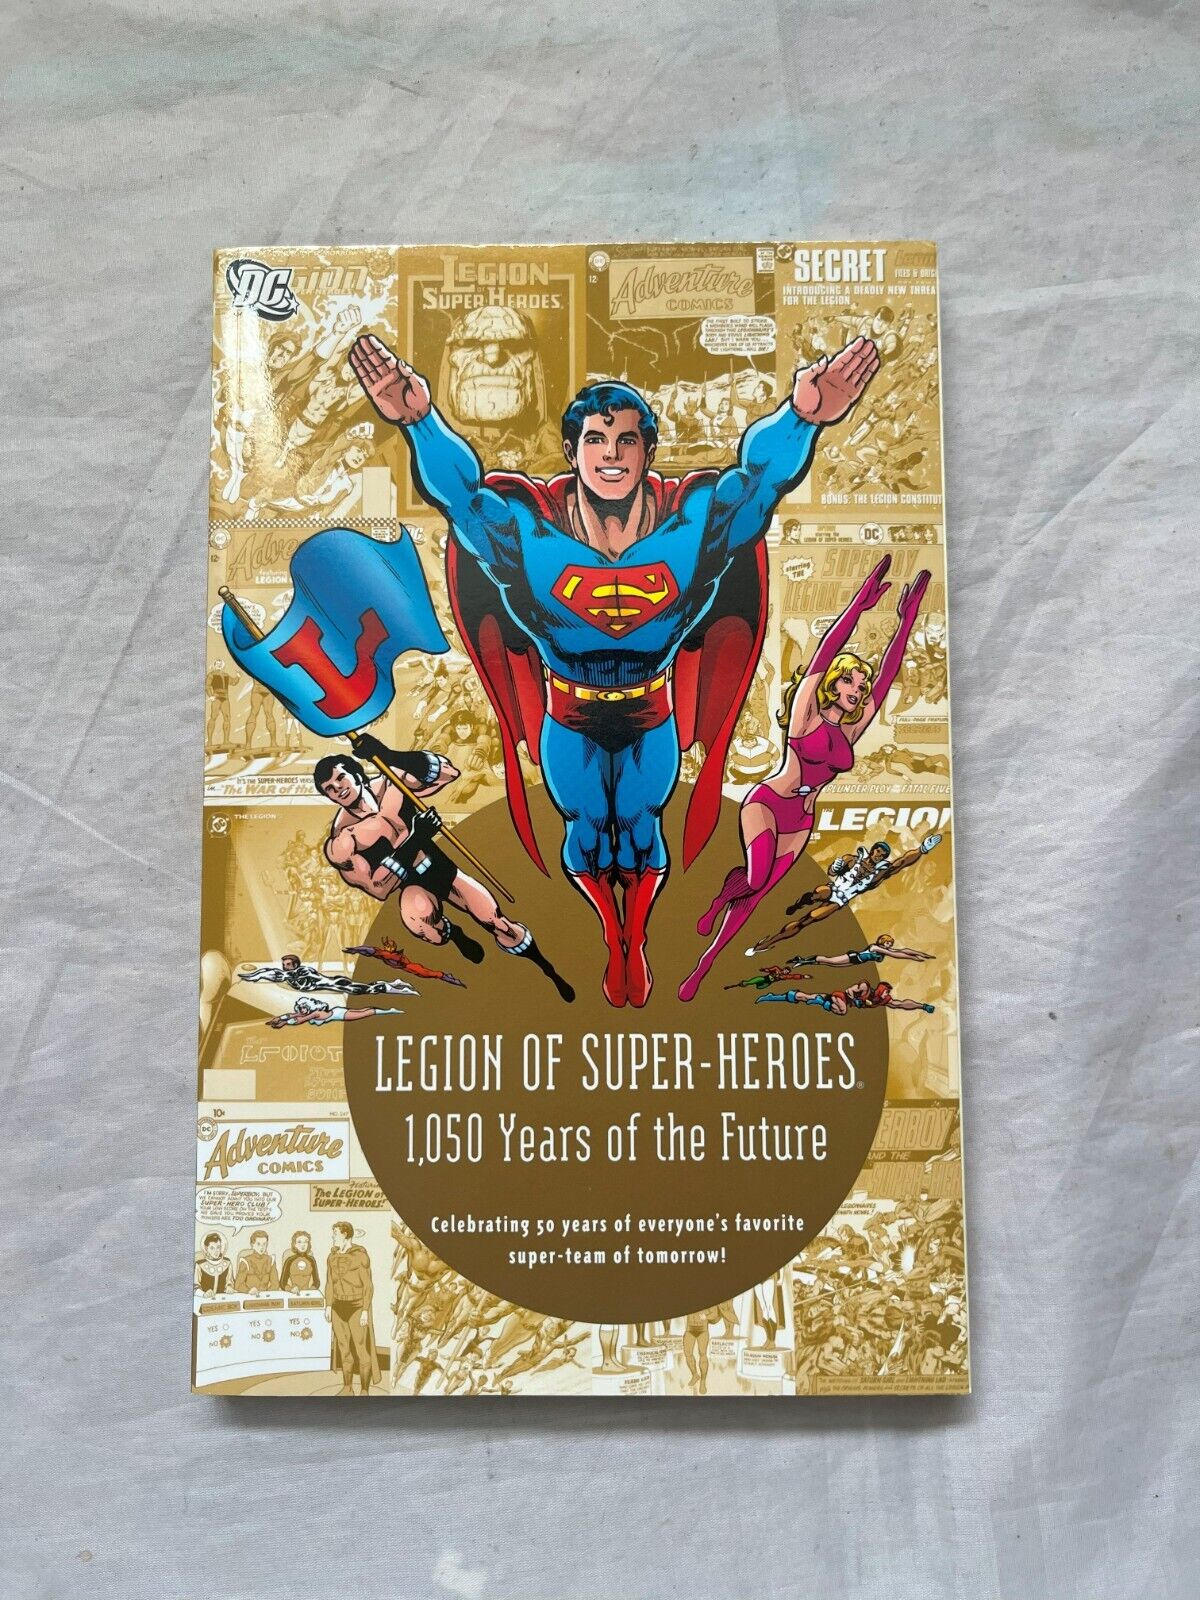 Legion Of Super-Heroes 1,050 Years In The Future DC Comics Hardcover